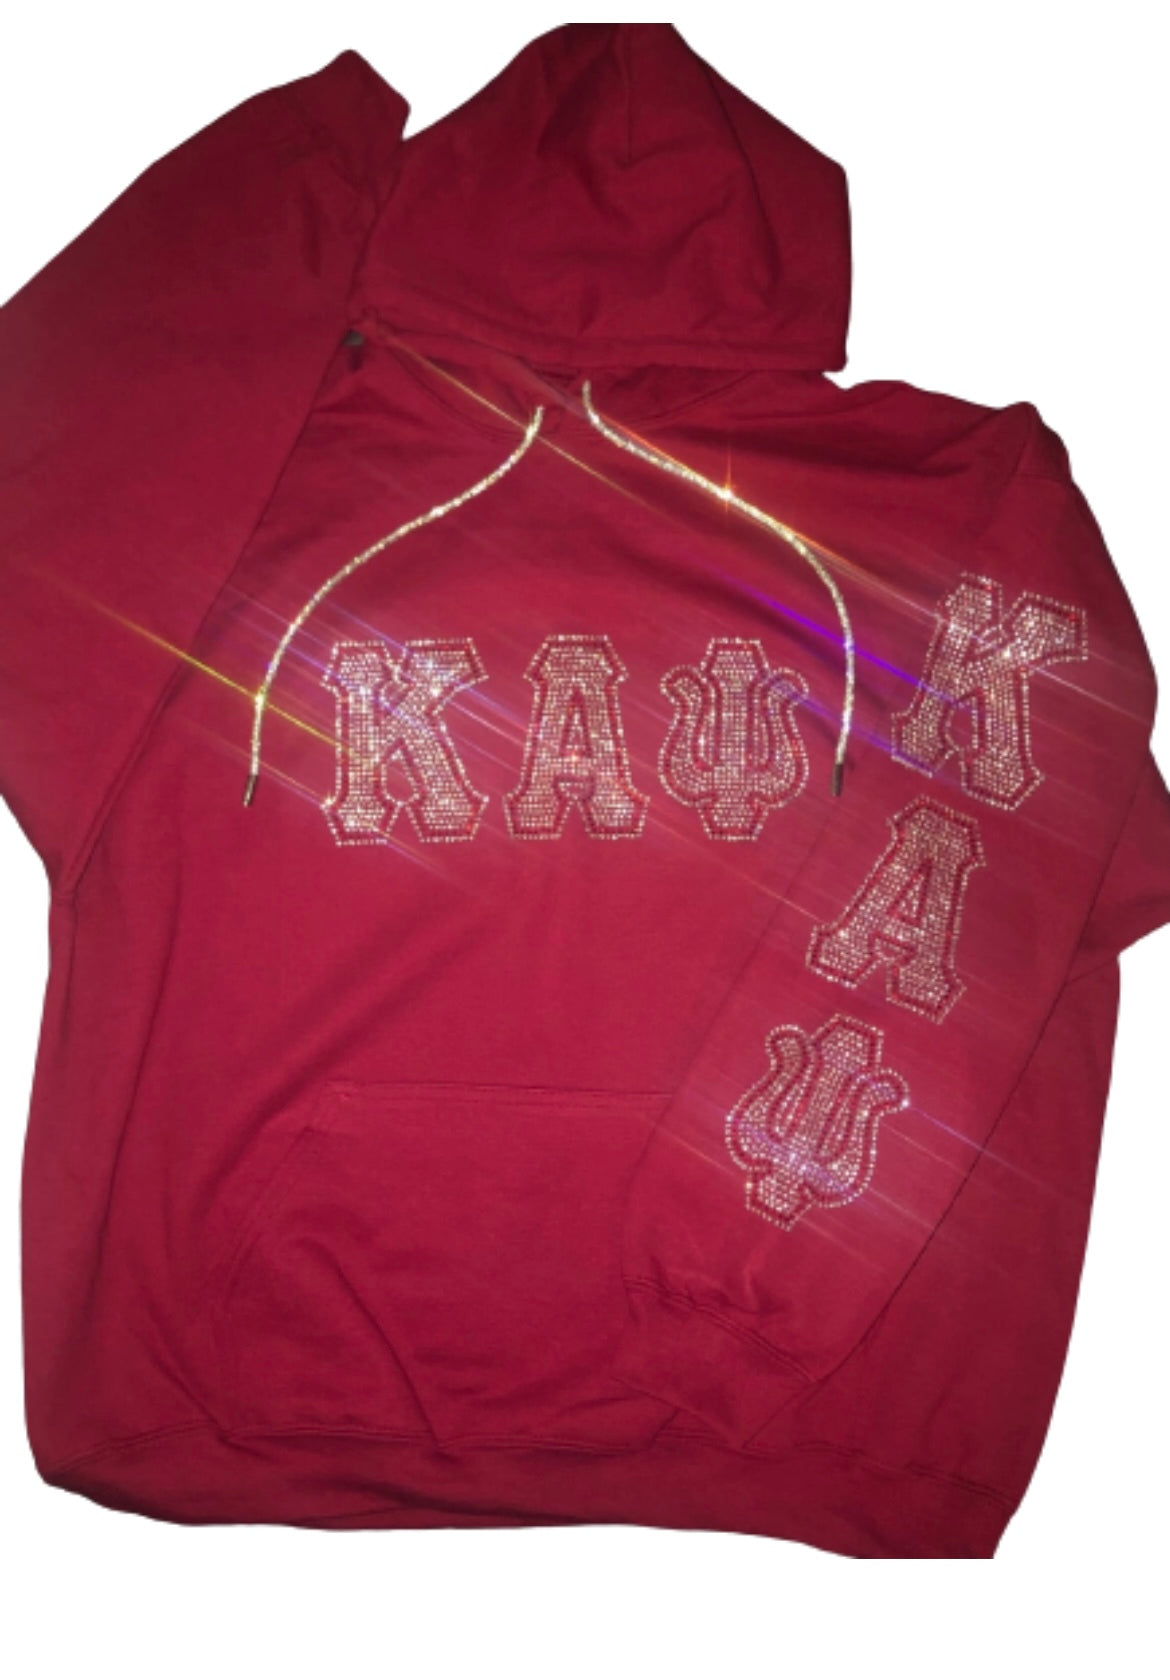 Bling String Hoodie - It's the BLING for Me